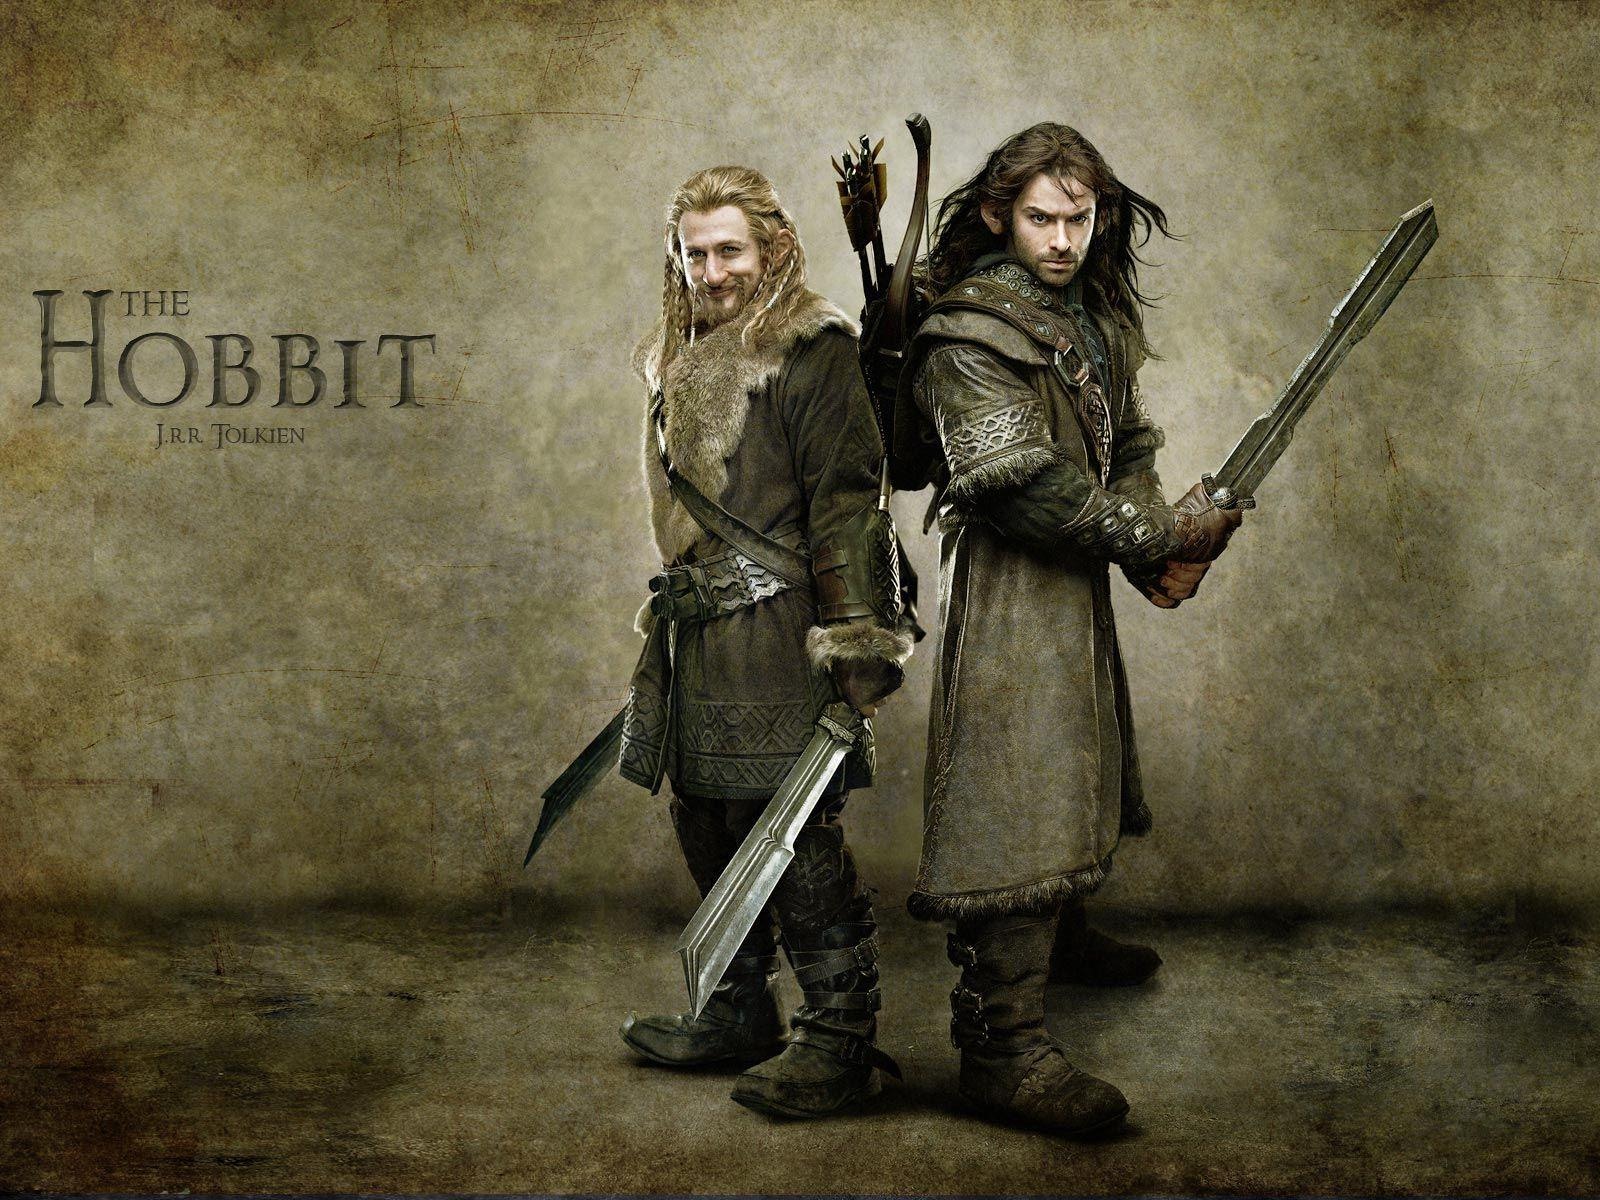 The Hobbit: An Unexpected Journey HD wallpapers #8 - 1600x1200